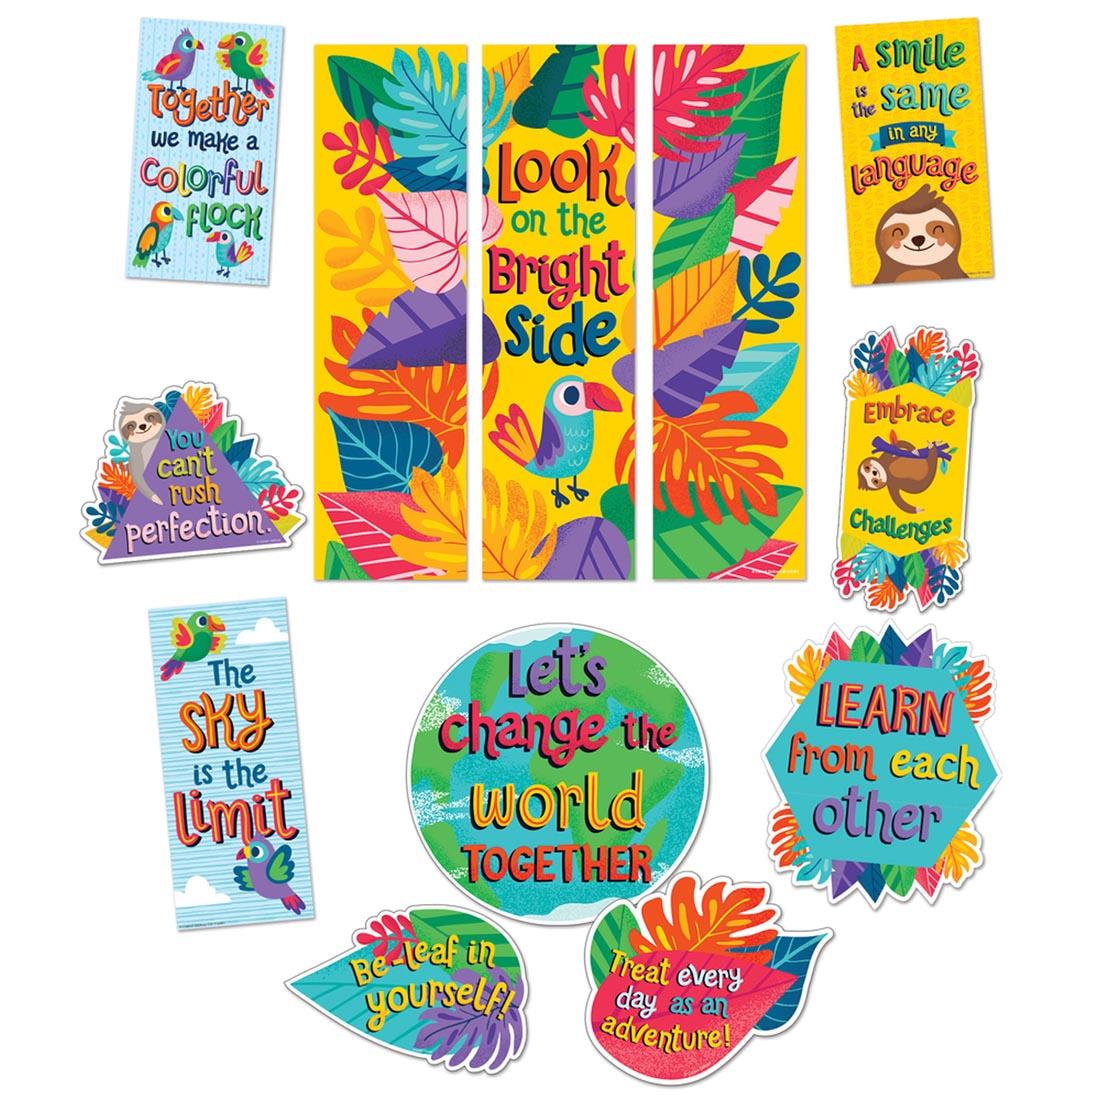 Motivational Mini Bulletin Board Set from the One World collection by Carson Dellosa